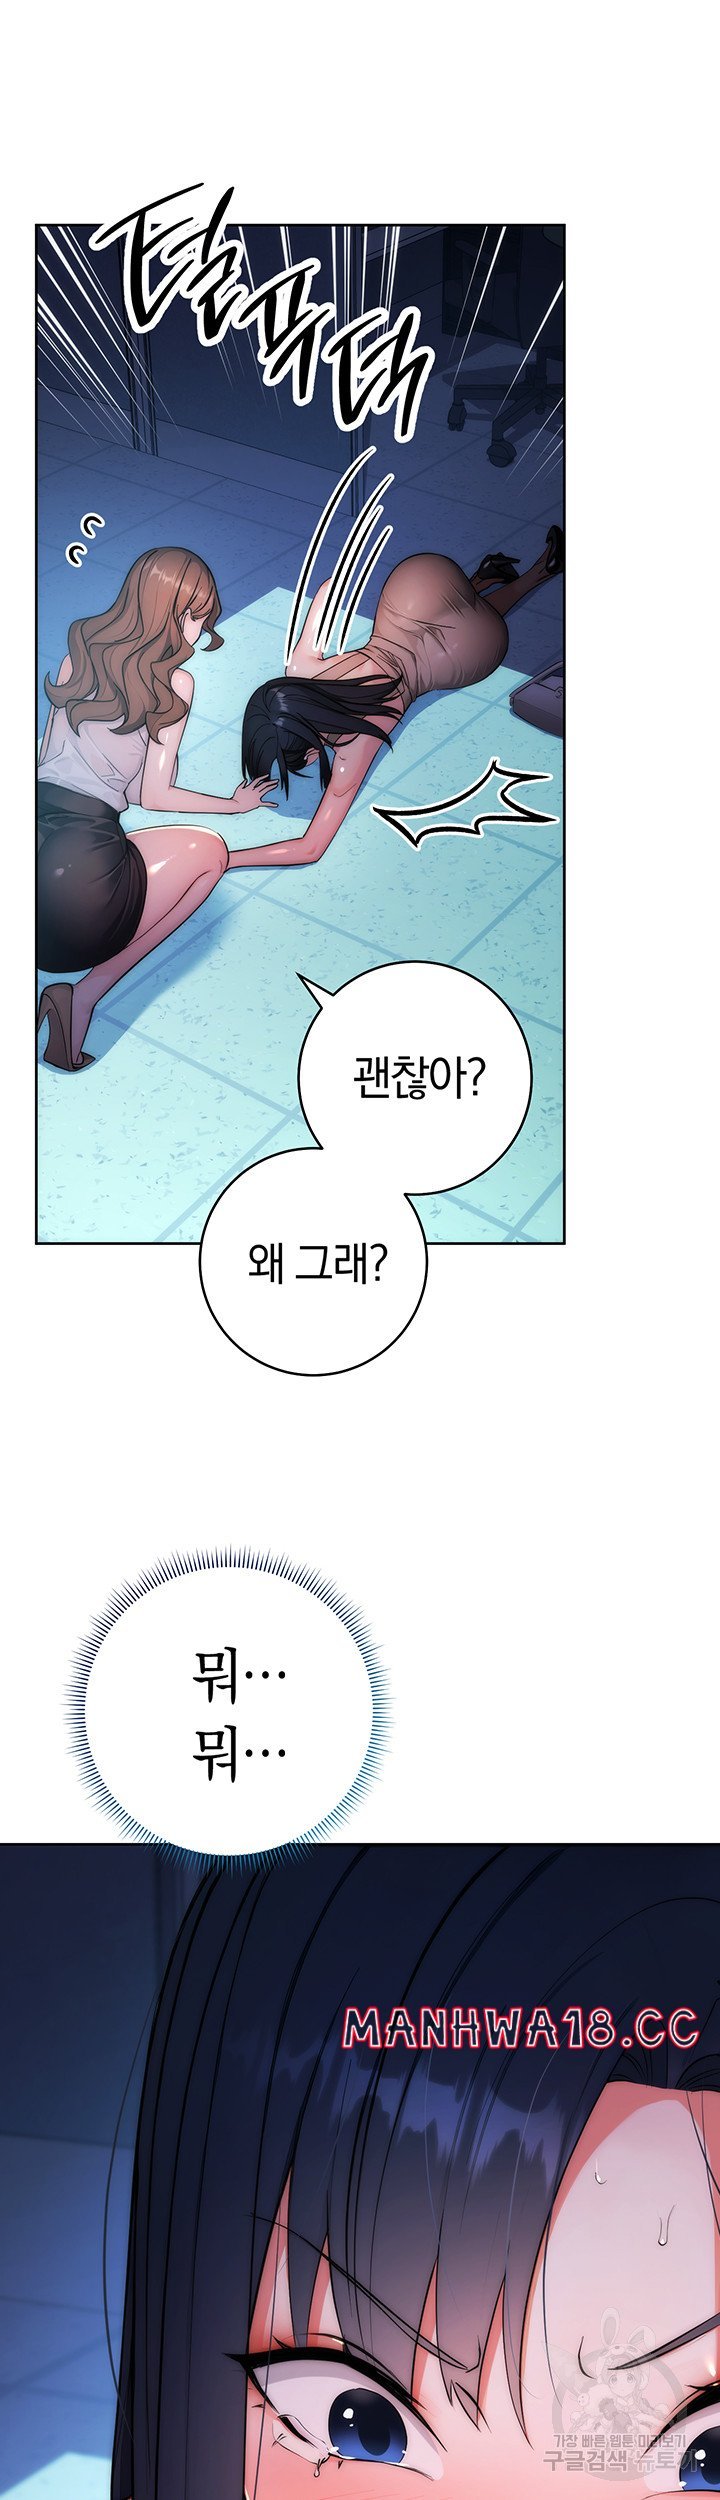 outsider-the-invisible-man-raw-chap-2-23